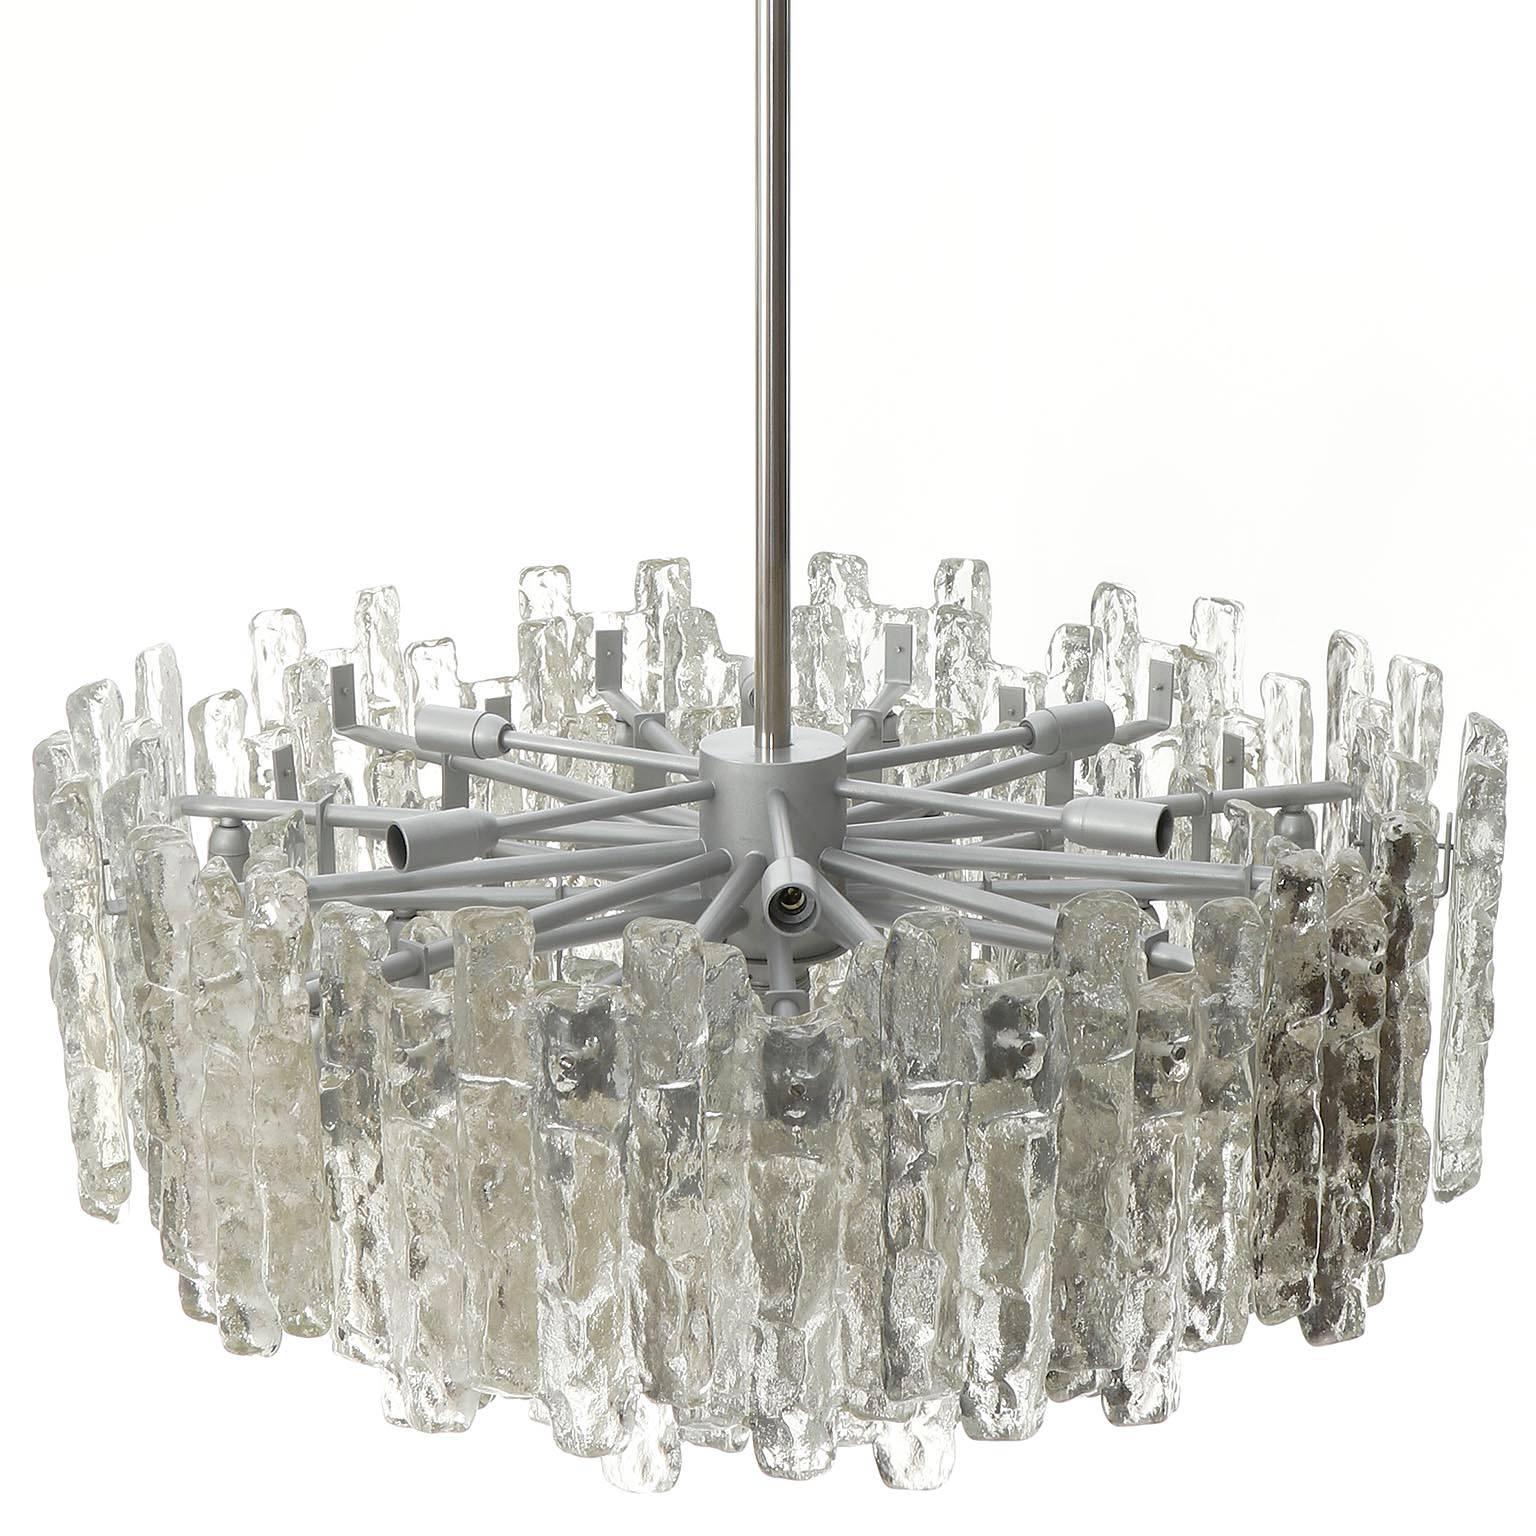 One of three extra large light fixtures model 'Soria' by Kalmar, Austria, manufactured in midcentury, circa 1970 (late 1960s or early 1970s). 
The offered chandeliers are the largest version of the 'Soria' series from Kalmar. They have been